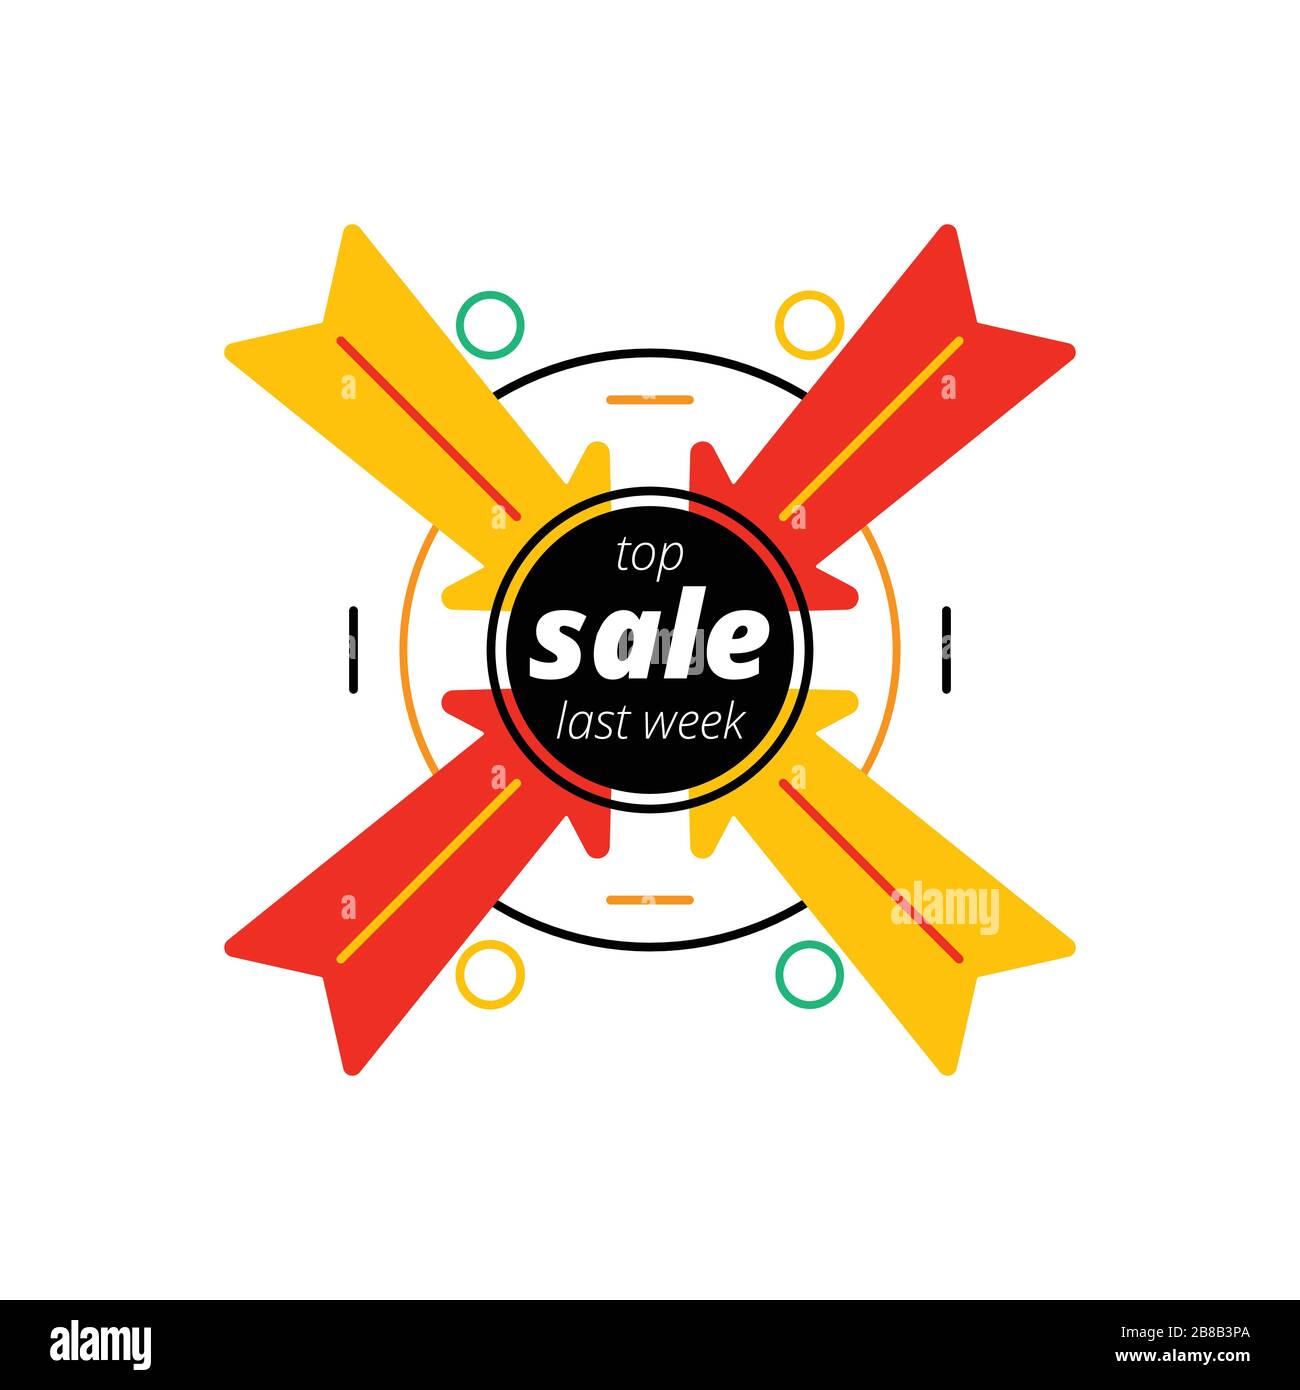 Red and yellow arrows pointing at circle with sale inscription Stock Vector